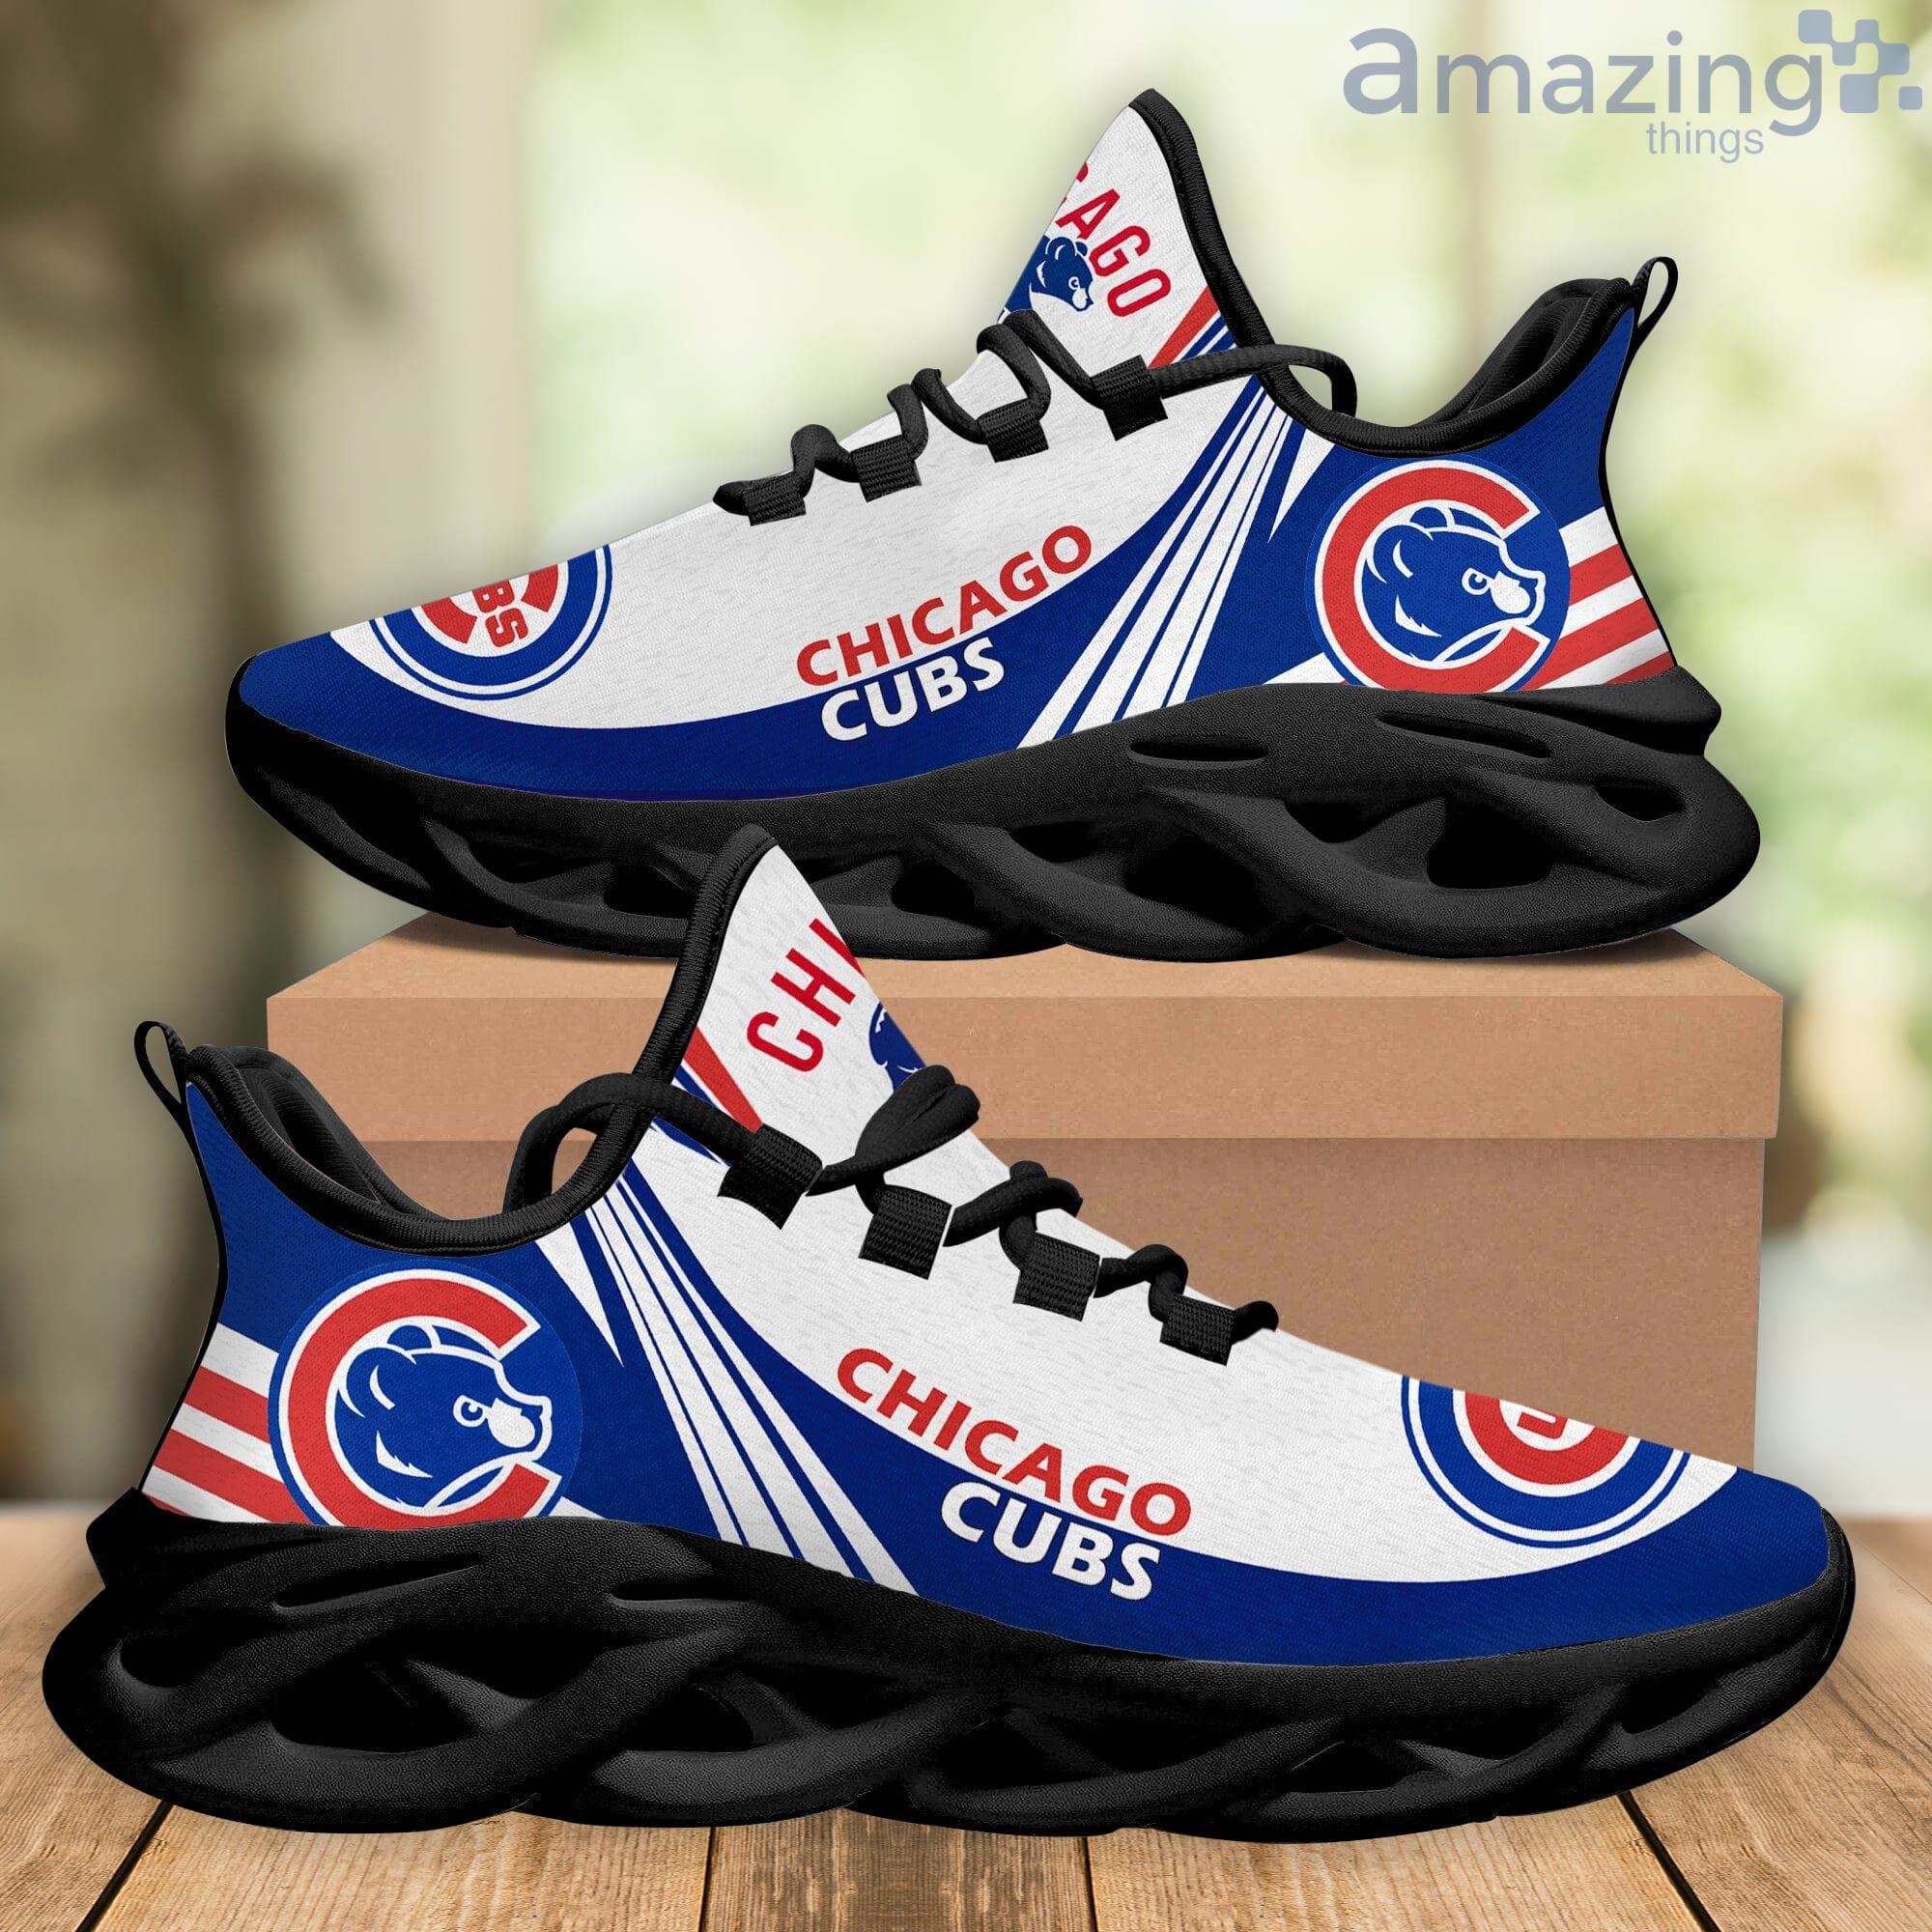 Chicago Cubs Casual 3D Max Soul Shoes Running Shoes For Men And Women